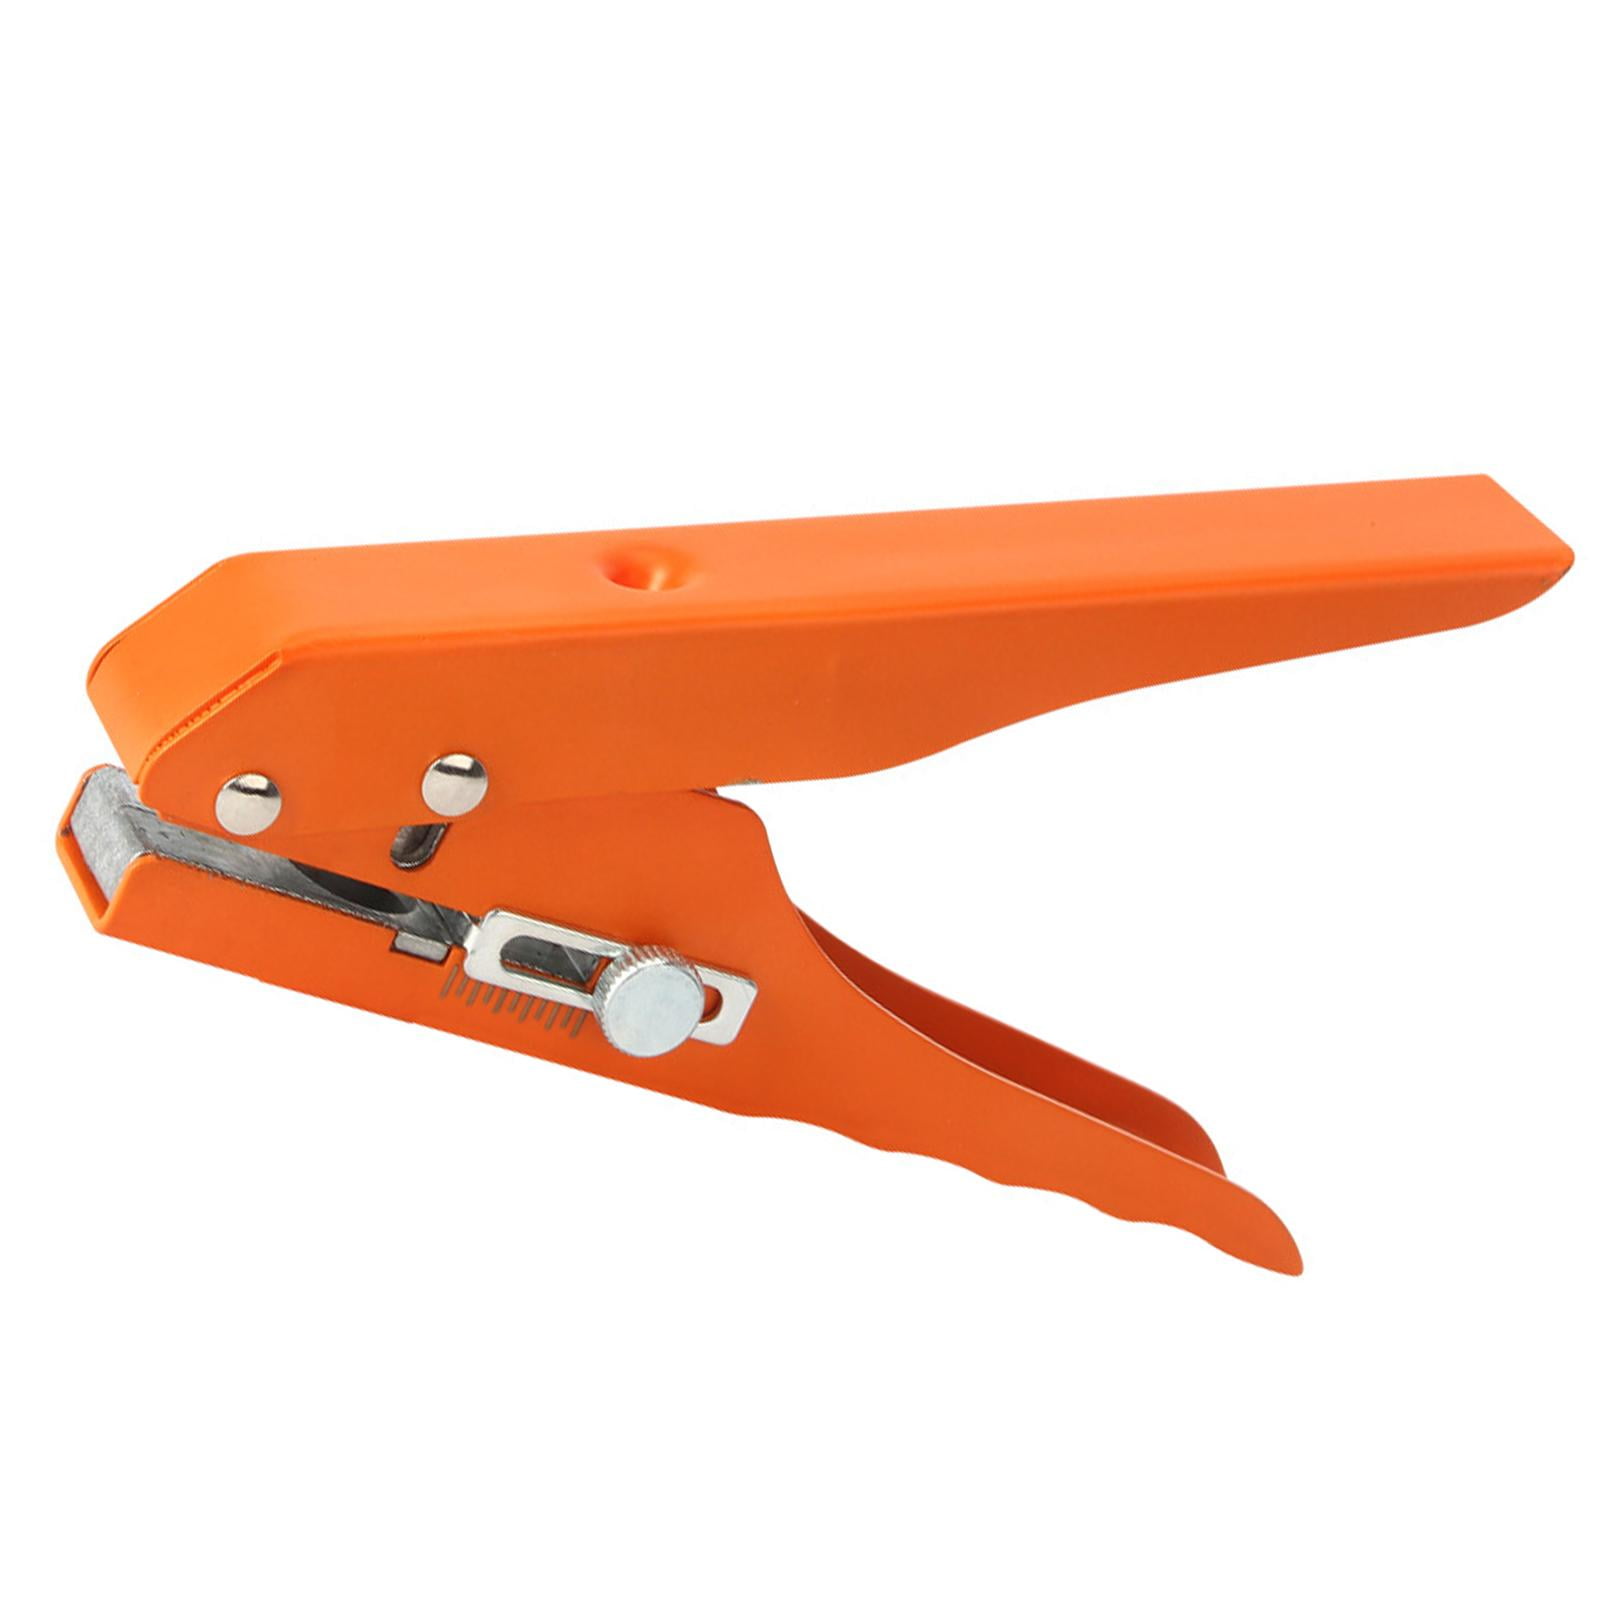 EXXO TOOLS Revolving Punch Plier - Leather Hole Punch Rivet Hole Puncher  for Crafts Belt Straps Fabric Plastic Rubber Cardboard Leather Punch Tool  Hand Tools (5/64, 3/32, 7/64, 1/8, 5/32, 13/16) 